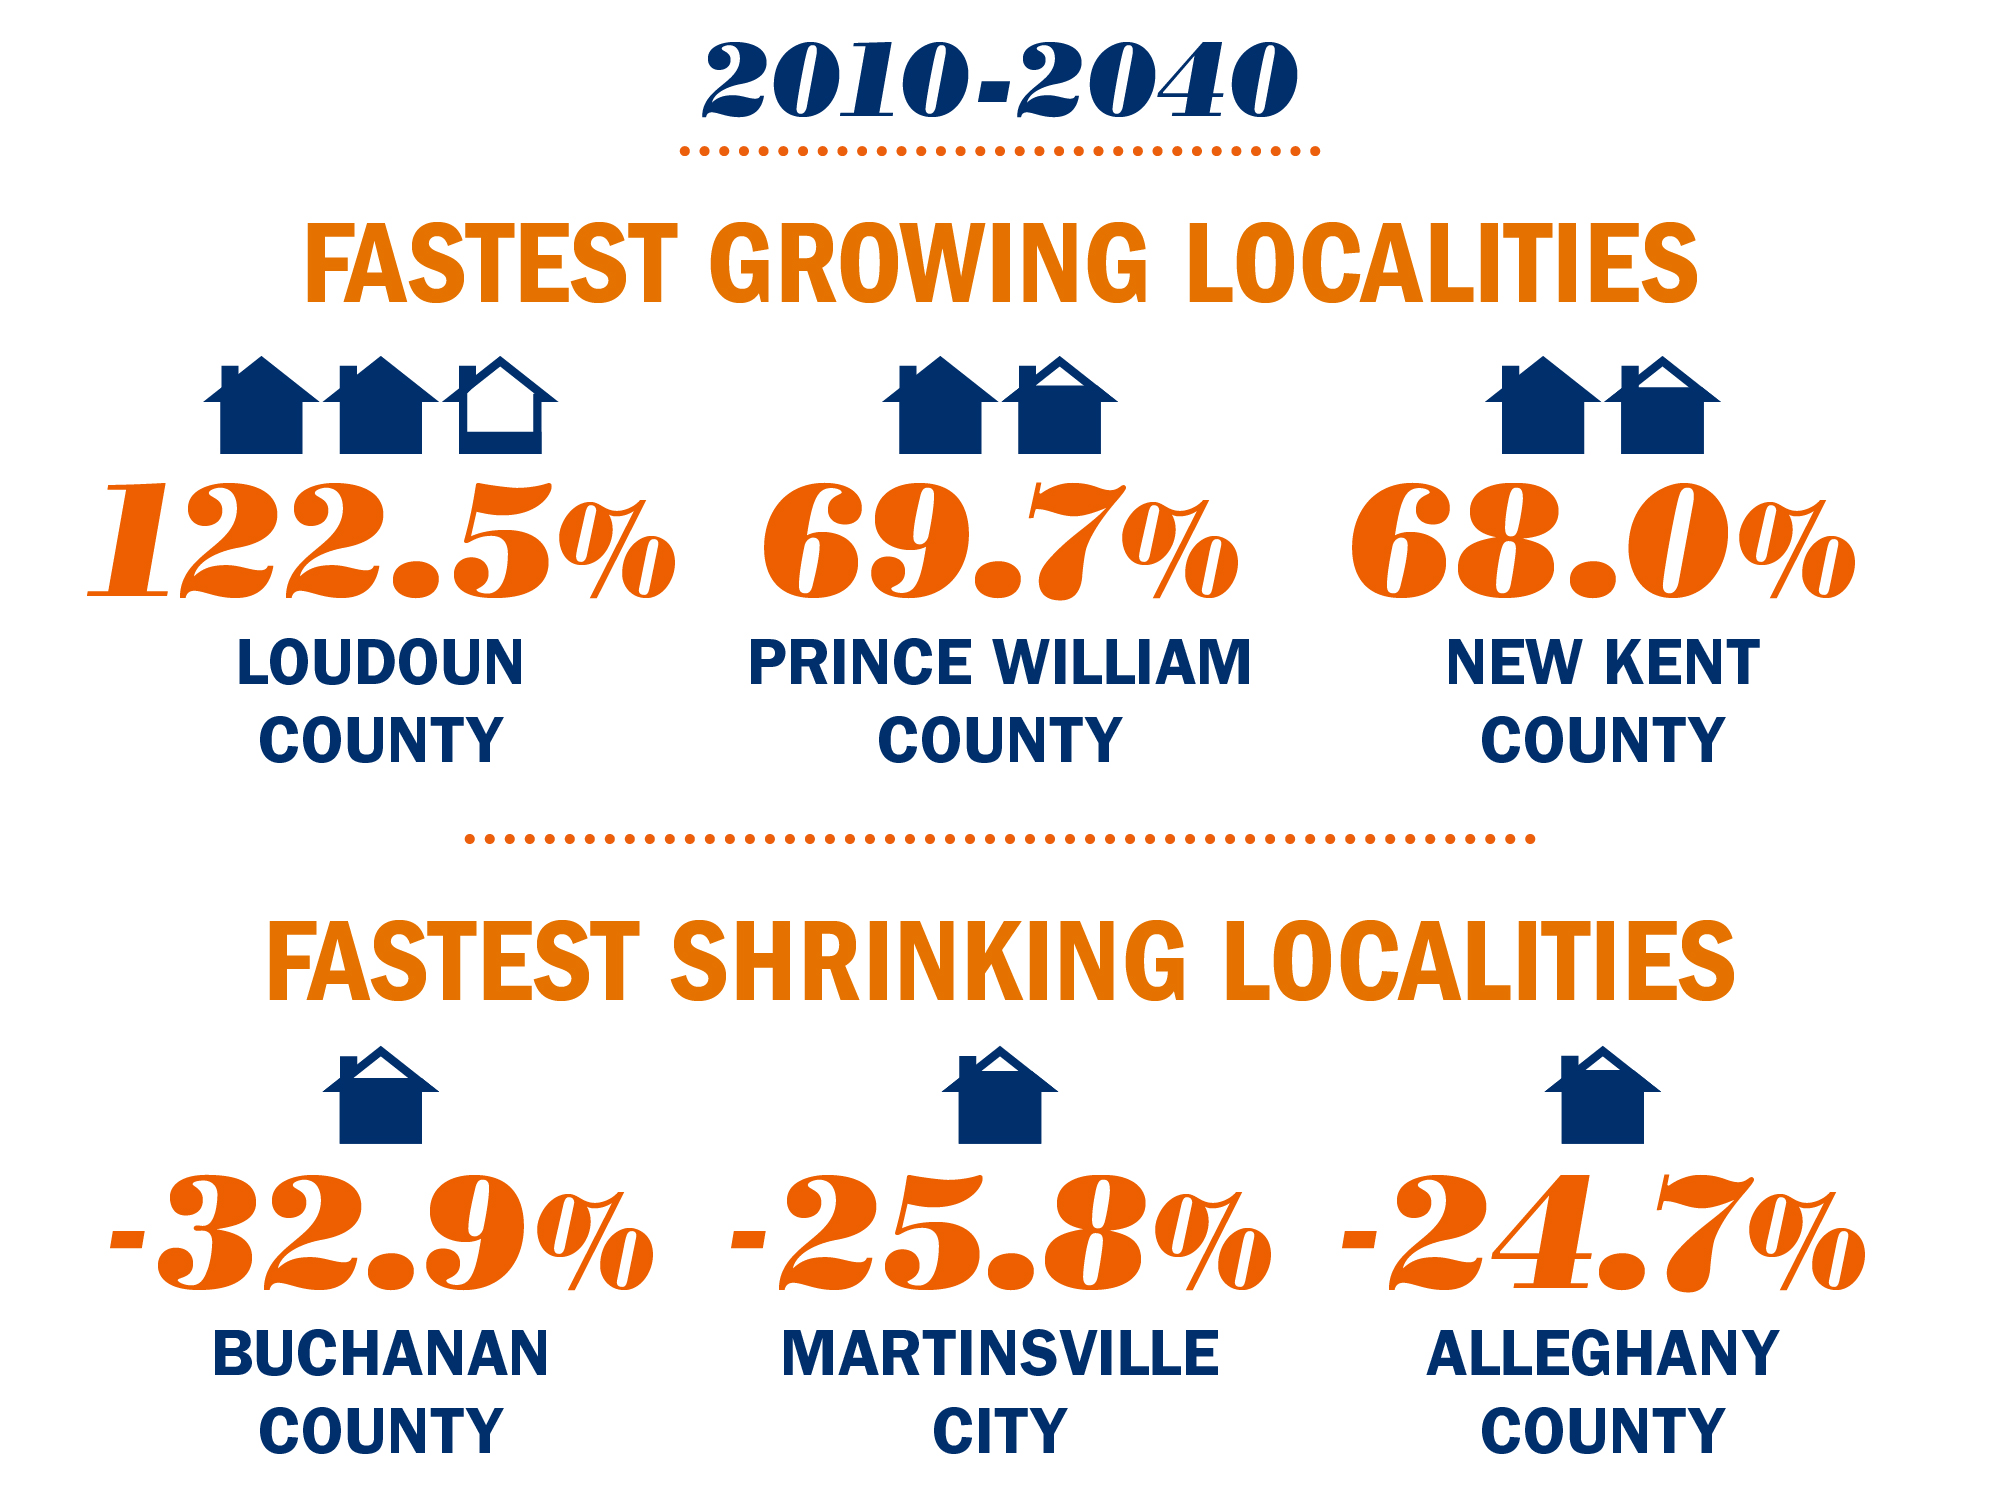 text reads 2010-2040 Fastest Growing localities Loudon County (122.5%), Prince William County (69.7%) and New Kent County (68%). Fastest Shrinking Localities Buchanan County (-32.9%), Martinsville (-25.8%), and Alleghany county (-24.7%) 